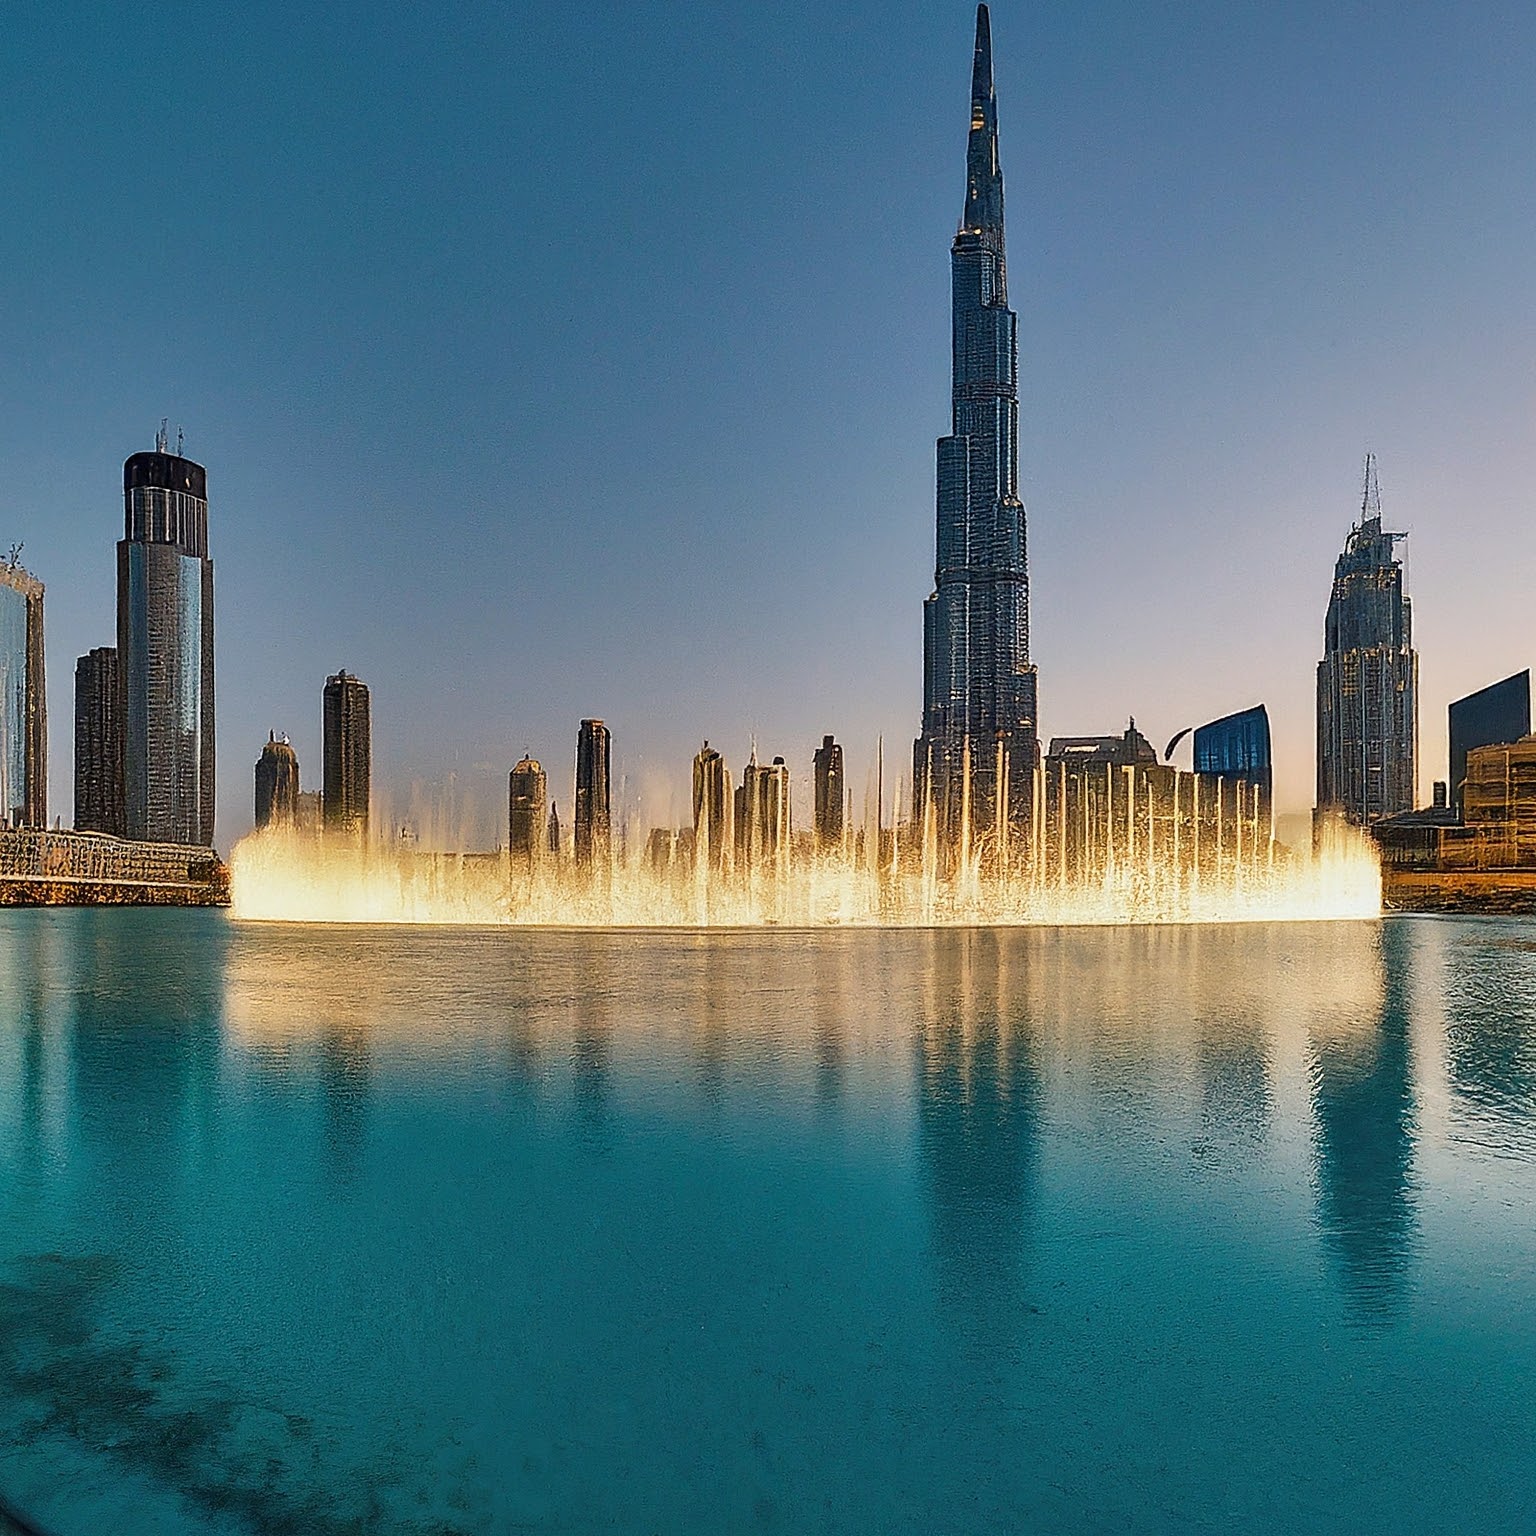 Panoramic view of The Dubai Fountain and Burj Khalifa in Dubai, UAE, with water show and cityscape reflection.